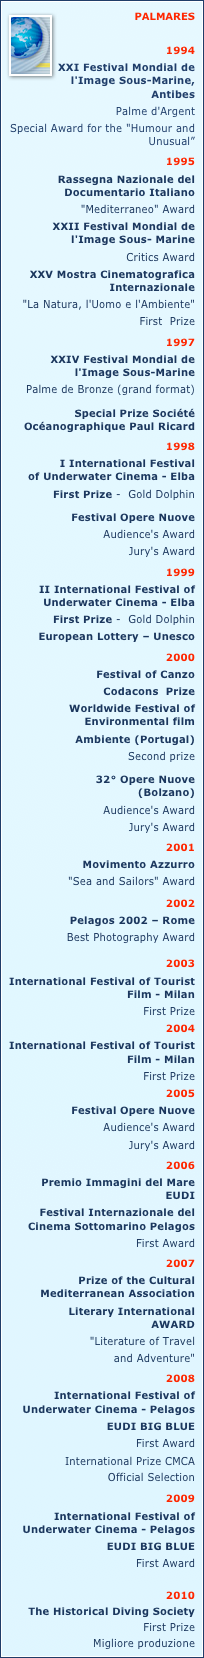 ￼PALMARES

1994  
XXI Festival Mondial de l'Image Sous-Marine, AntibesPalme d'Argent  
Special Award for the "Humour and Unusual”
1995  
Rassegna Nazionale del Documentario Italiano   "Mediterraneo" Award
XXII Festival Mondial de l'Image Sous- MarineCritics Award
XXV Mostra Cinematografica Internazionale "La Natura, l'Uomo e l'Ambiente"  First  Prize1997 
XXIV Festival Mondial de l'Image Sous-MarinePalme de Bronze (grand format)
 Special Prize Société Océanographique Paul Ricard1998             I International Festival of Underwater Cinema - ElbaFirst Prize -  Gold Dolphin

Festival Opere Nuove	Audience's Award
 Jury's Award
1999  
 II International Festival of Underwater Cinema - Elba          First Prize -  Gold Dolphin
European Lottery – Unesco
2000
Festival of CanzoCodacons  Prize
Worldwide Festival of Environmental film 
Ambiente (Portugal)Second prize
           32° Opere Nuove (Bolzano)Audience's Award
Jury's Award 
2001 
Movimento Azzurro              "Sea and Sailors" Award2002
Pelagos 2002 – Rome         Best Photography Award2003
International Festival of Tourist  Film - Milan           First Prize2004 
International Festival of Tourist  Film - Milan         
 First Prize 
2005
Festival Opere Nuove          Audience's Award
Jury's Award 
2006
 Premio Immagini del Mare EUDI        Festival Internazionale del Cinema Sottomarino Pelagos 
First Award
2007
Prize of the Cultural   Mediterranean Association    Literary International AWARD
"Literature of Travel
and Adventure"
2008
International Festival of  Underwater Cinema - Pelagos 
EUDI BIG BLUE
First Award 
International Prize CMCA Official Selection
2009
International Festival of  Underwater Cinema - Pelagos 
EUDI BIG BLUE
First Award
2010
The Historical Diving Society
First Prize
Migliore produzione